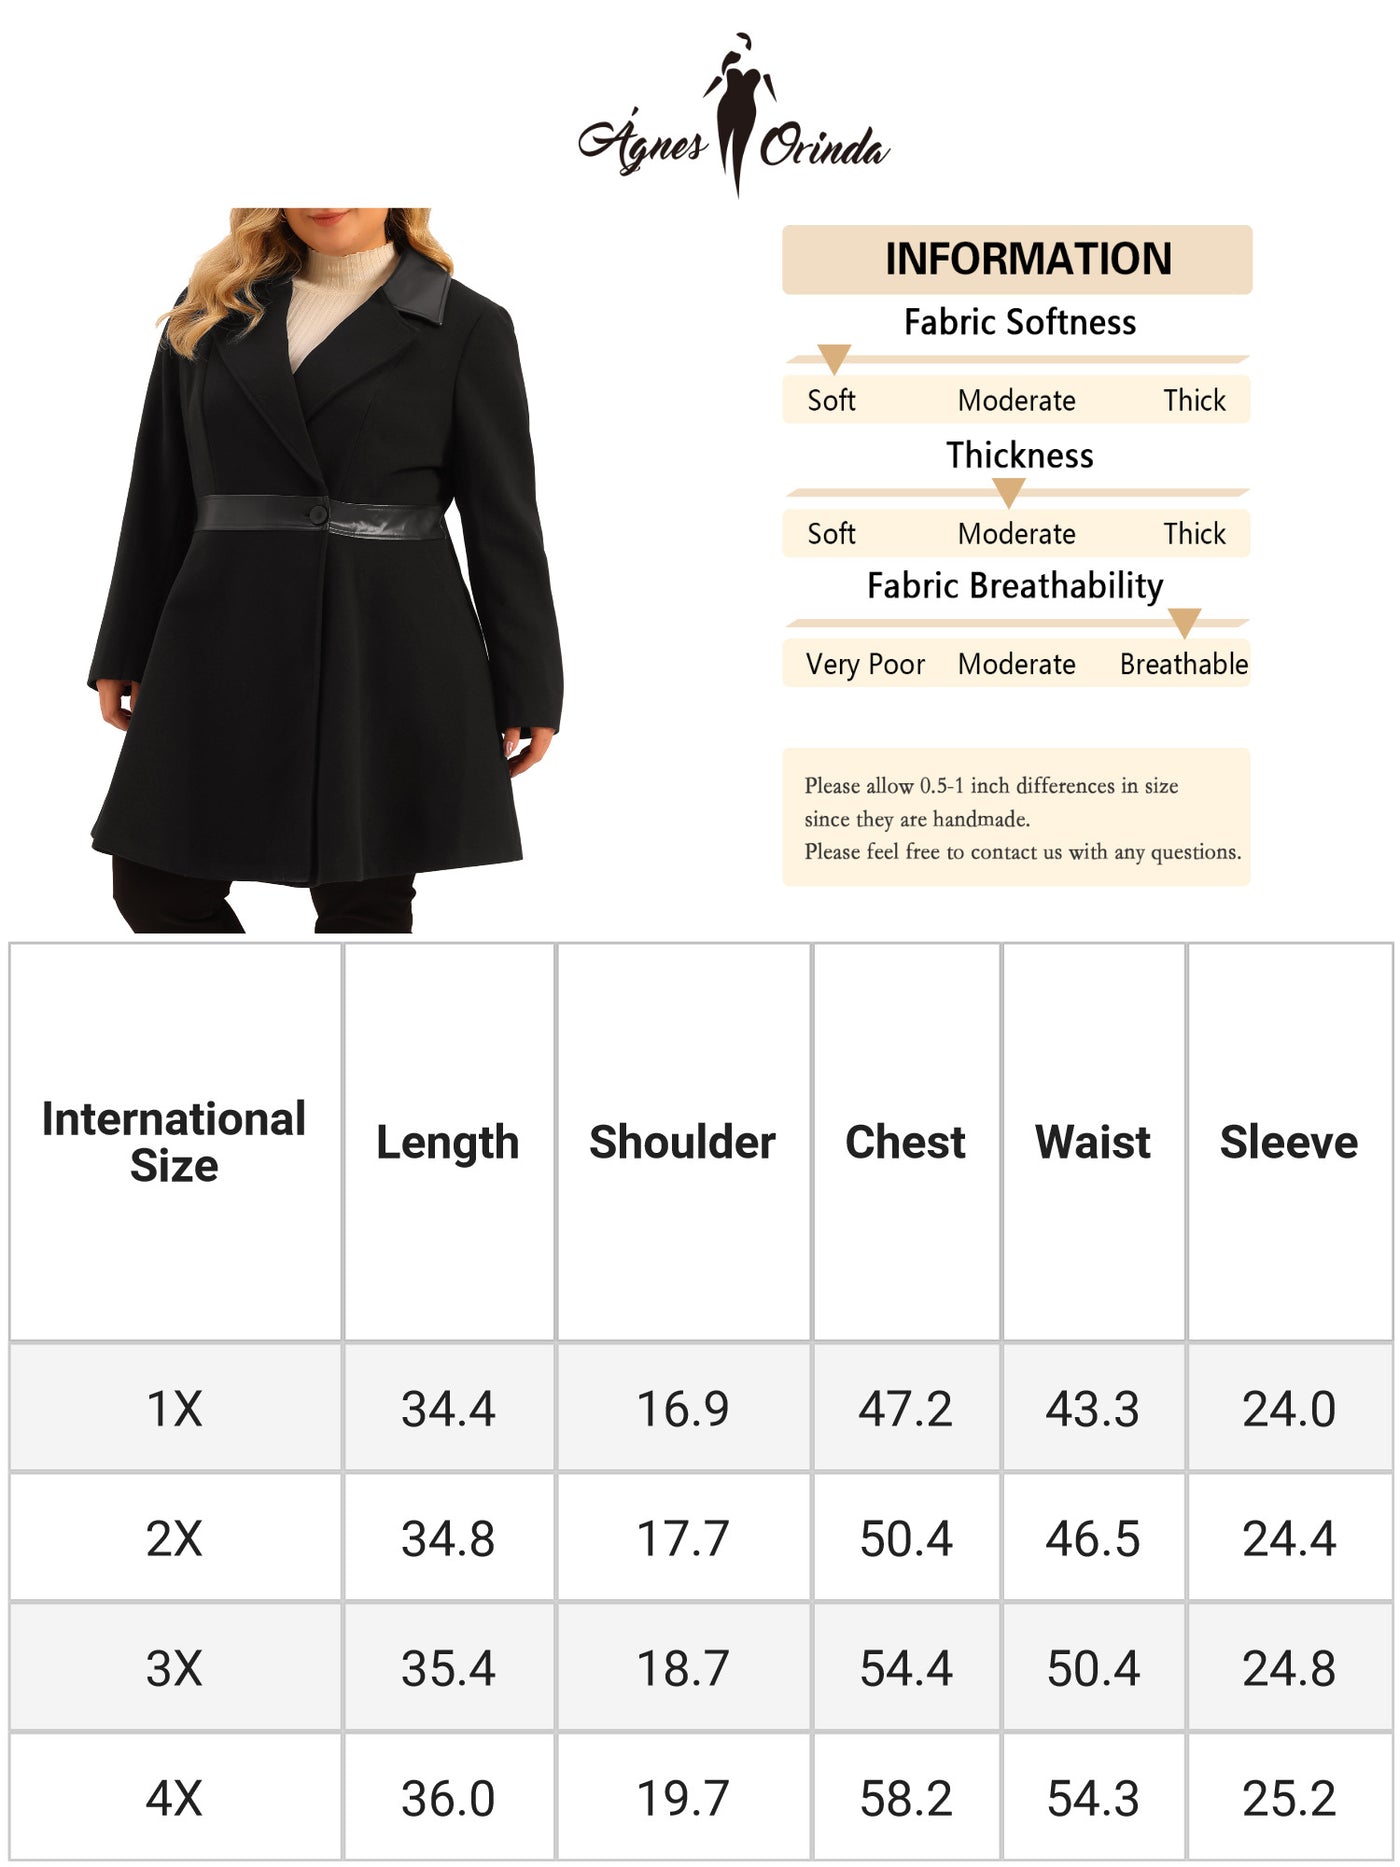 Bublédon Overcoat for Women Plus Size Leather Notched Lapel Single Breasted Long Trench Coats Jacket